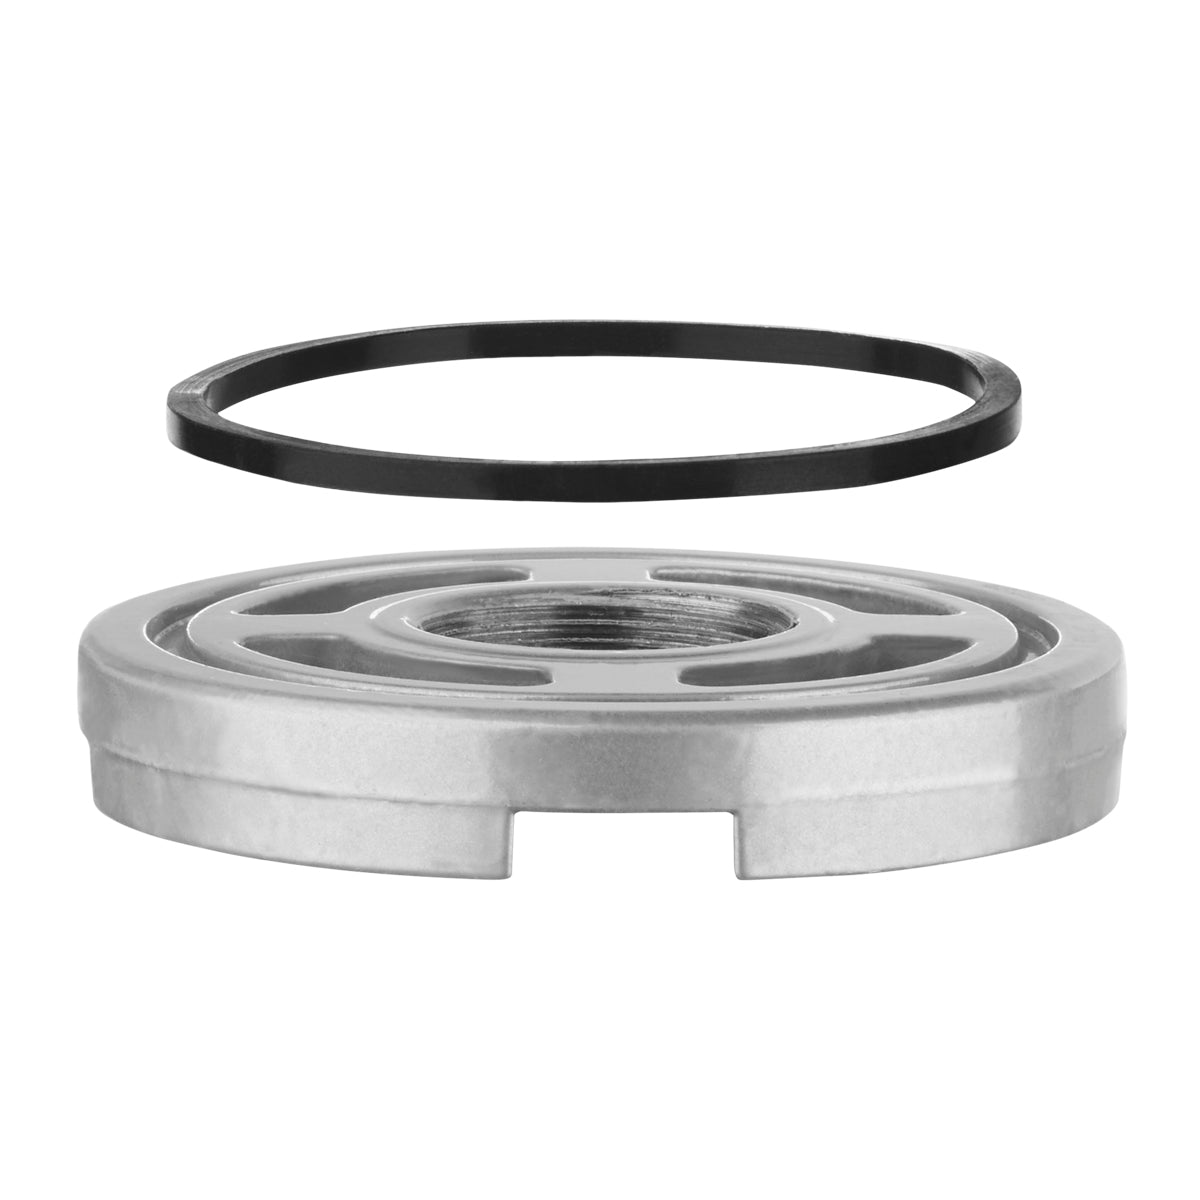 CAC159 - Retainer Ring Kit - Includes Retainer Ring & Gasket